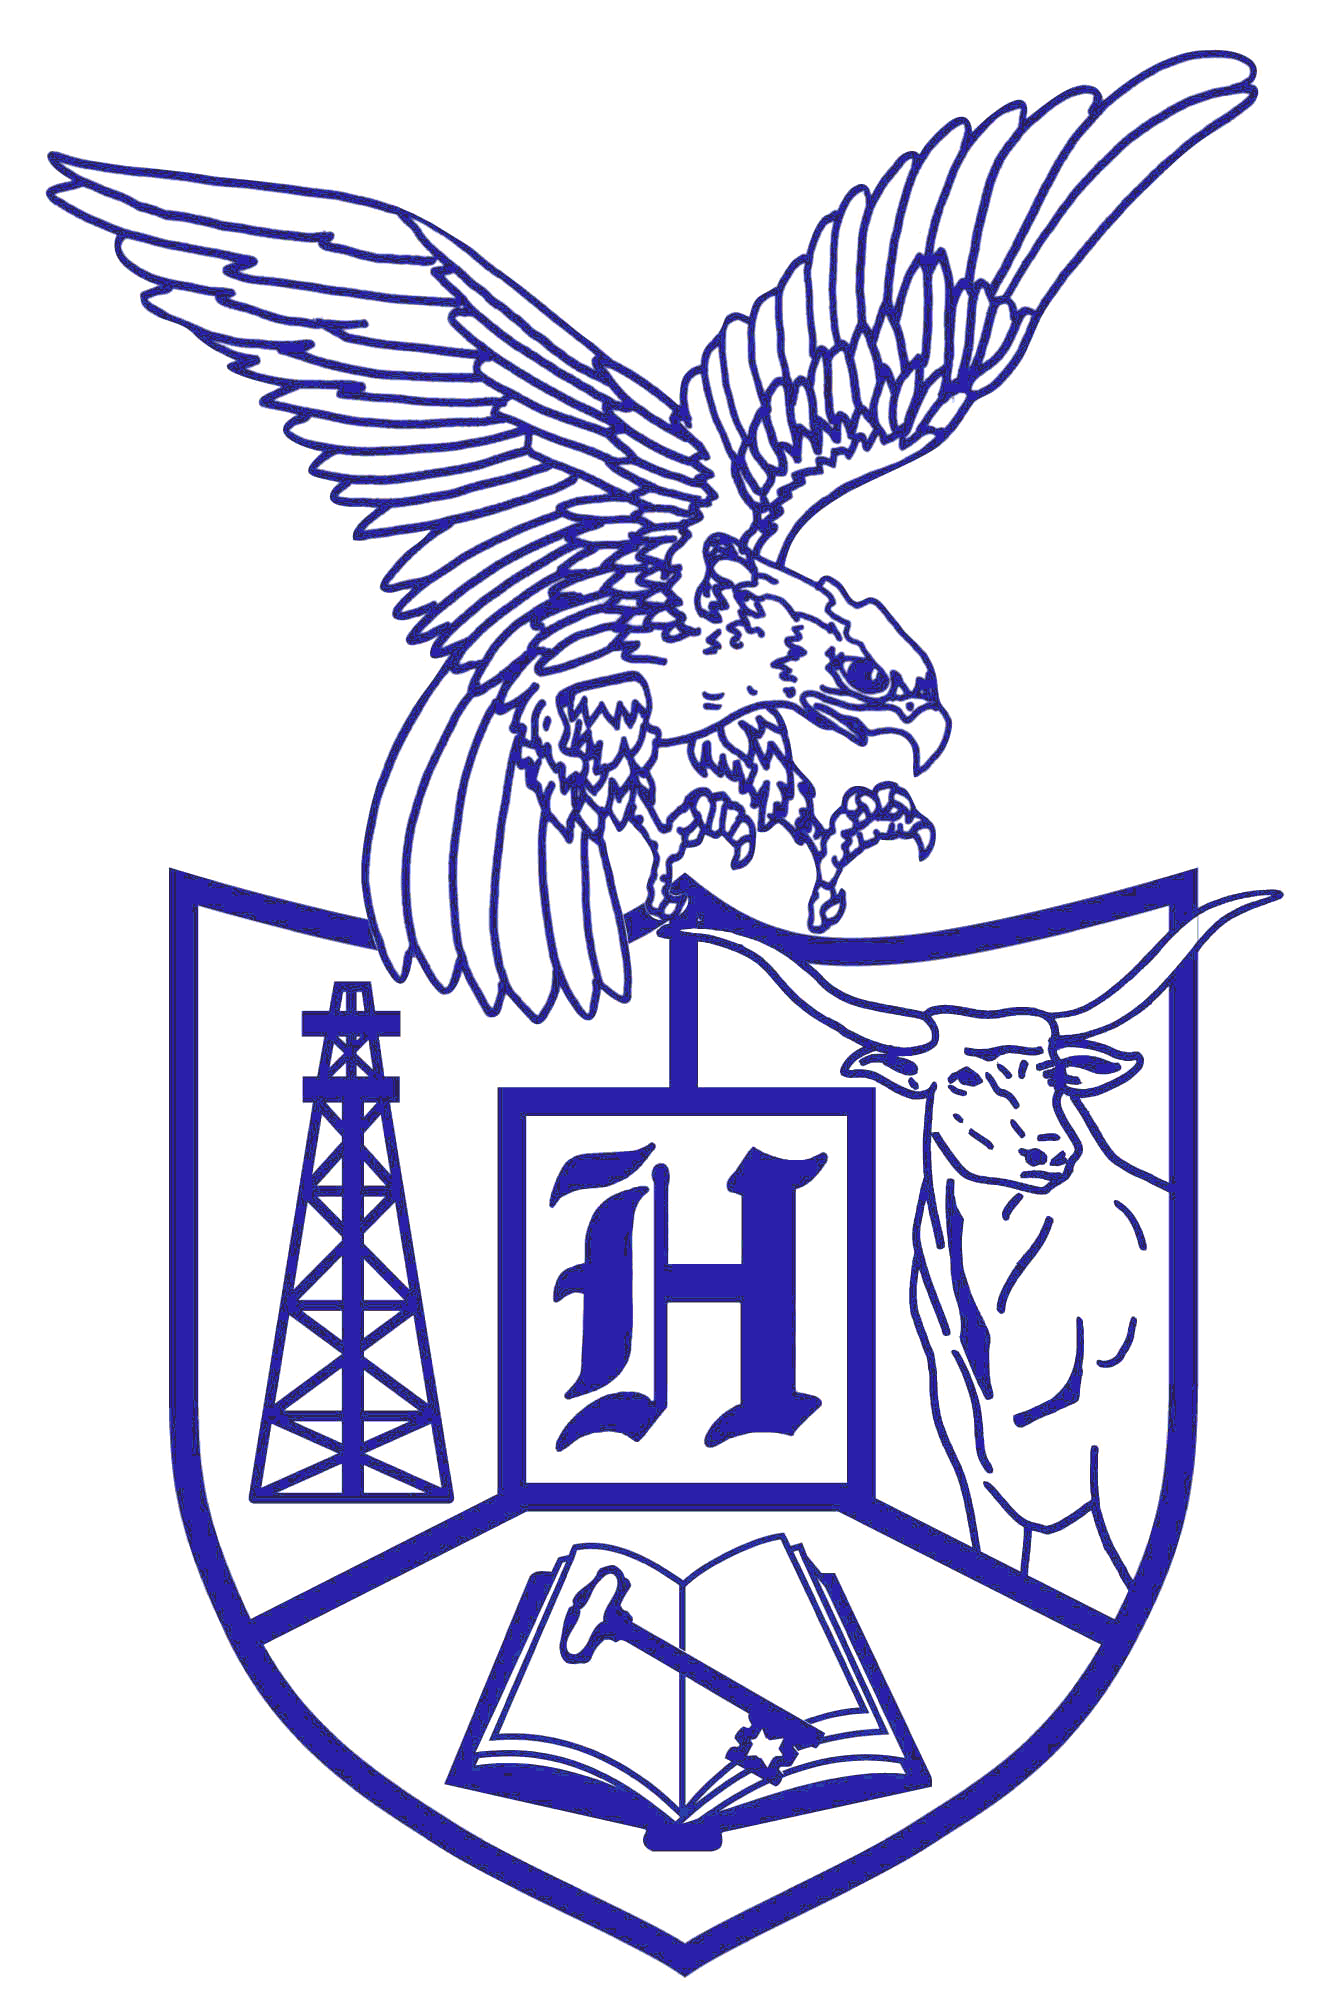 HISD Logo - Home Independent School District